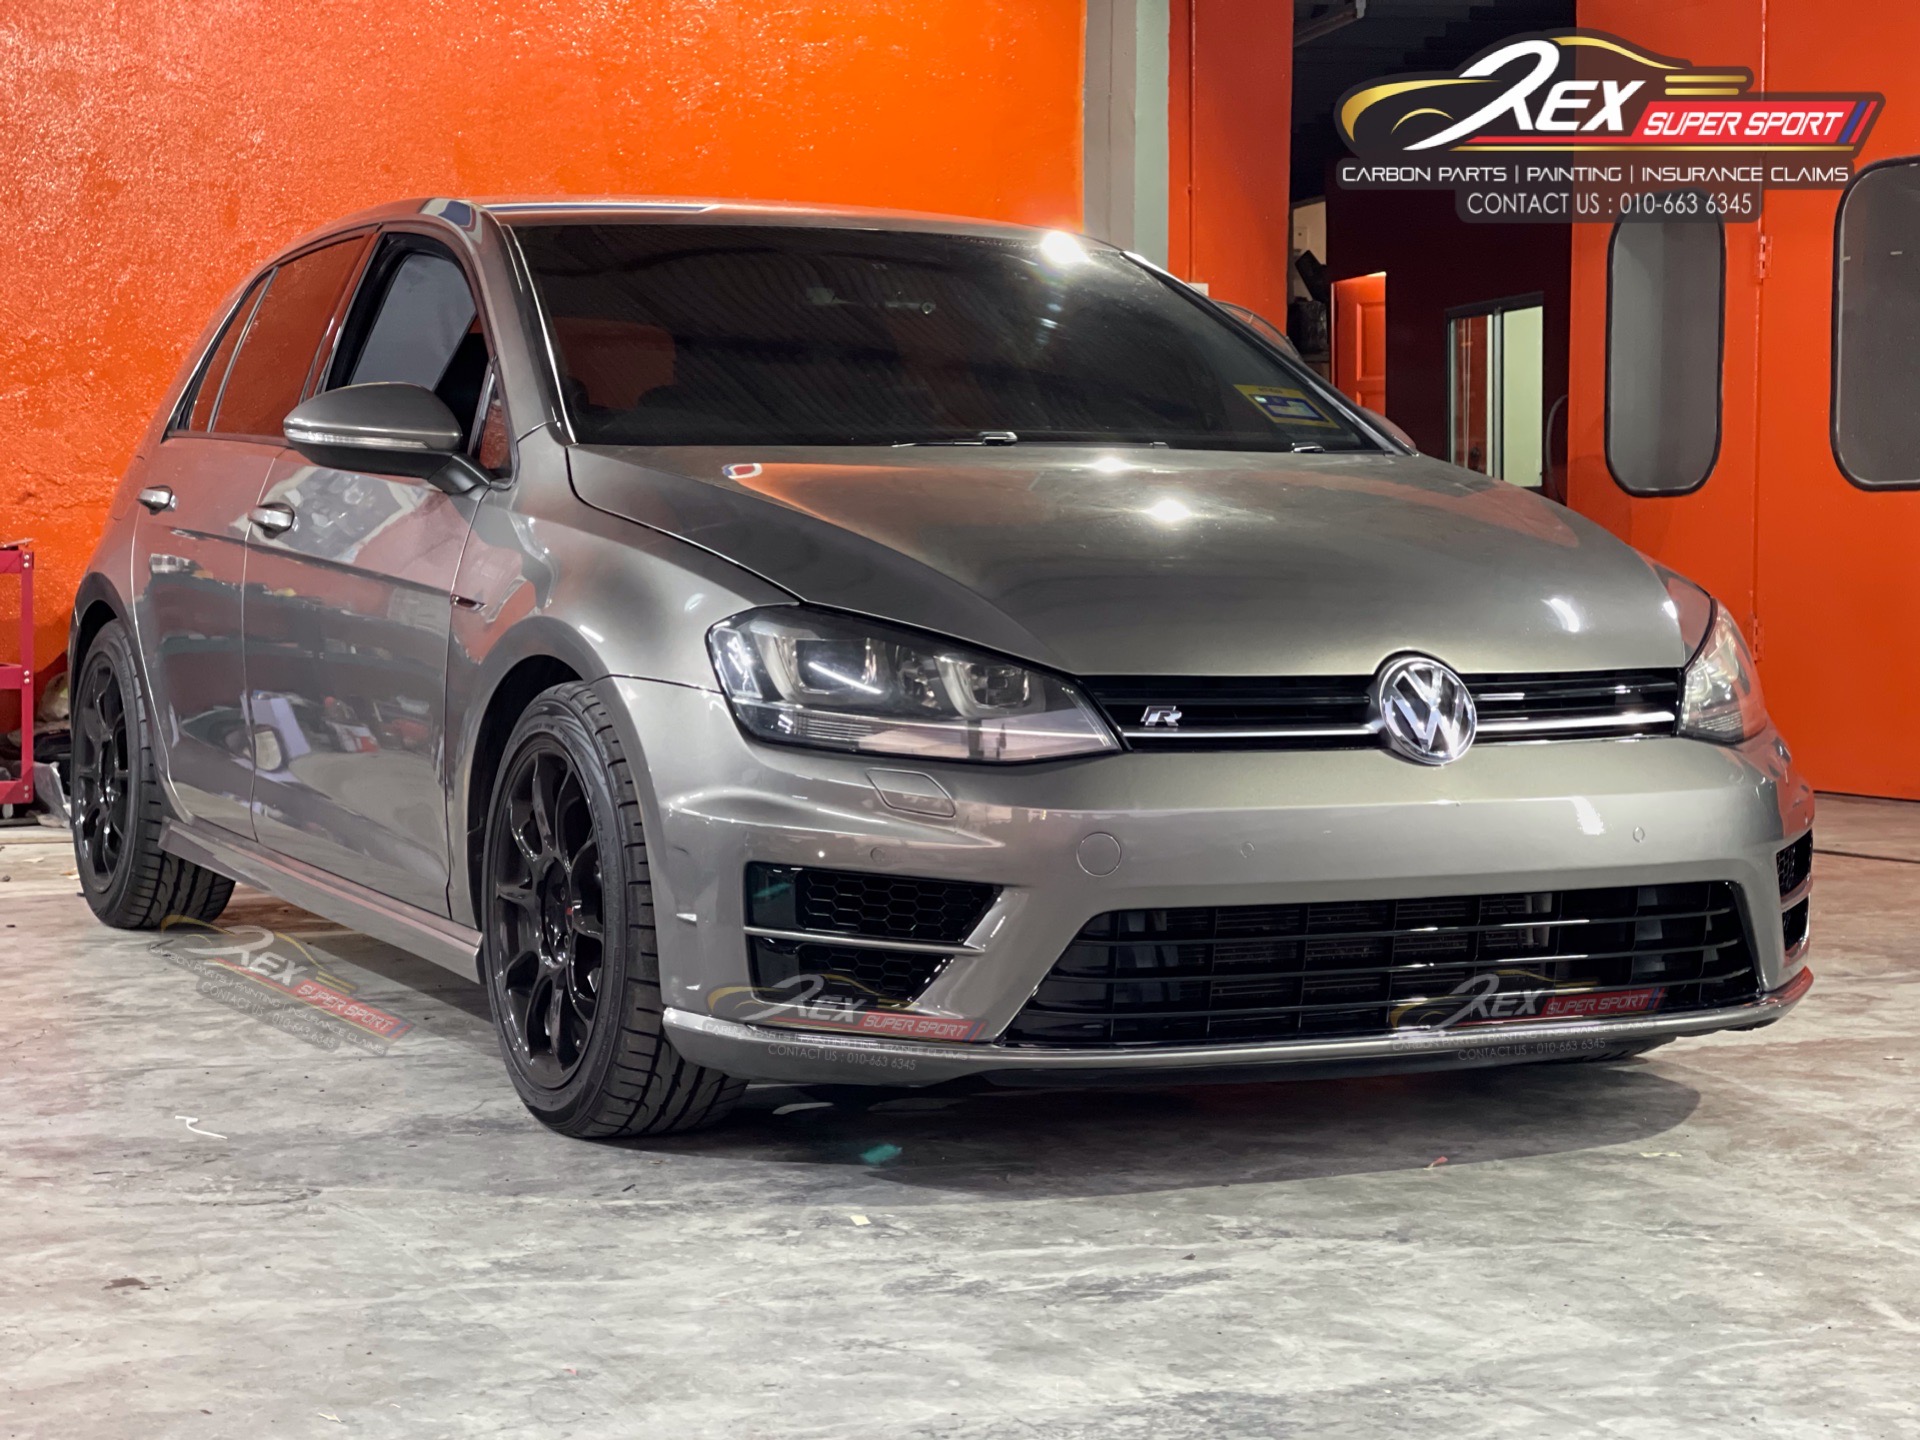 Golf Mk7 Bumper R Front | Rexsupersport - Specializes In Providing ...